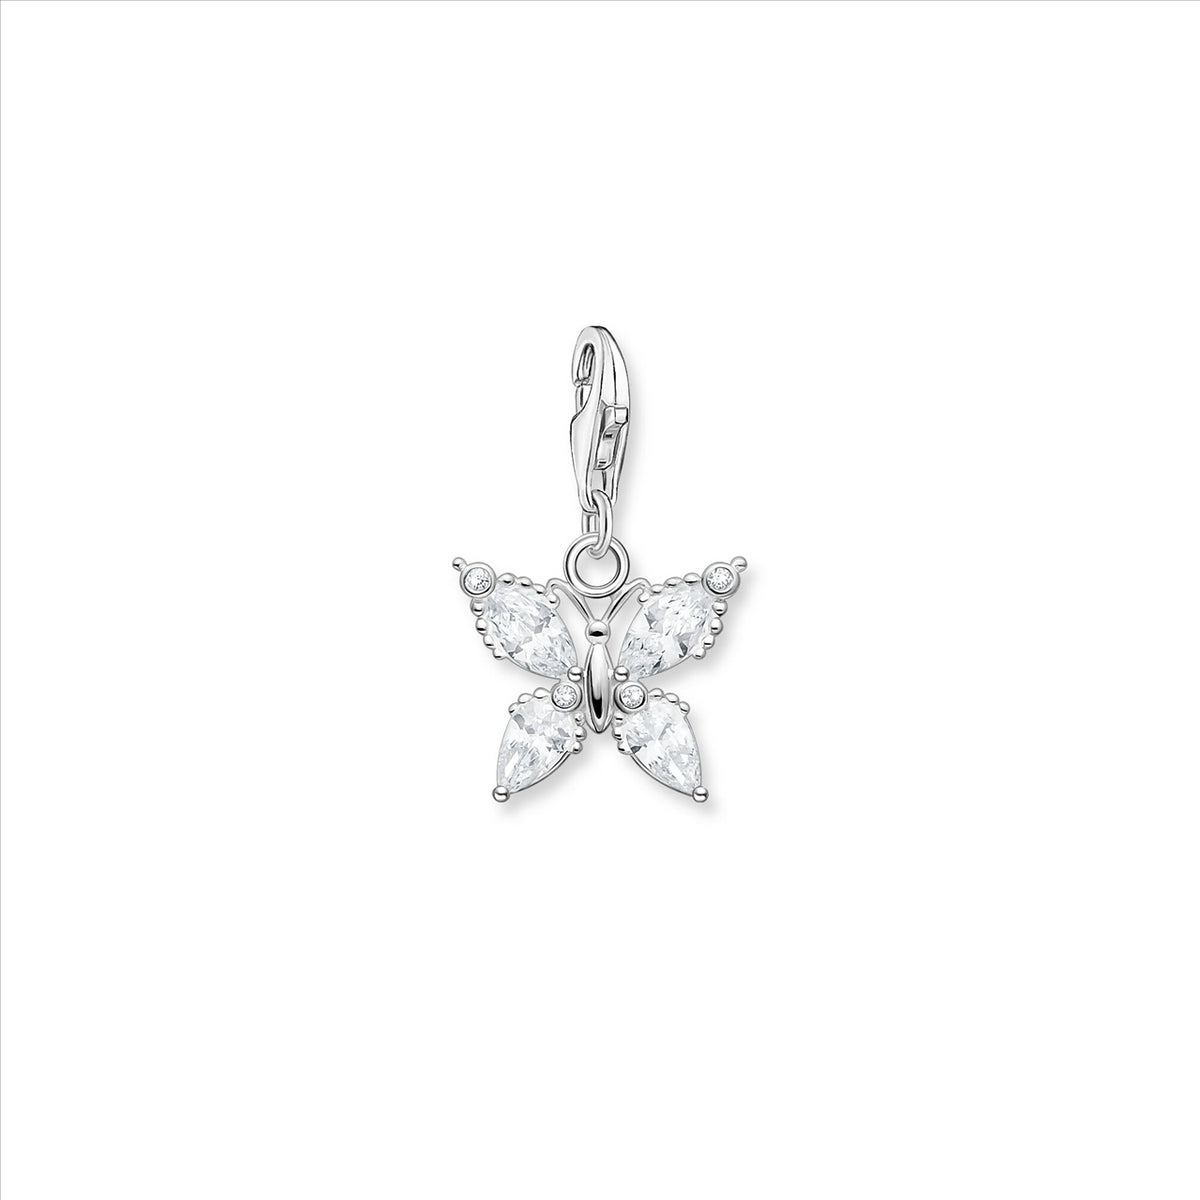 Thomas Sabo Silver Butterfly Charm